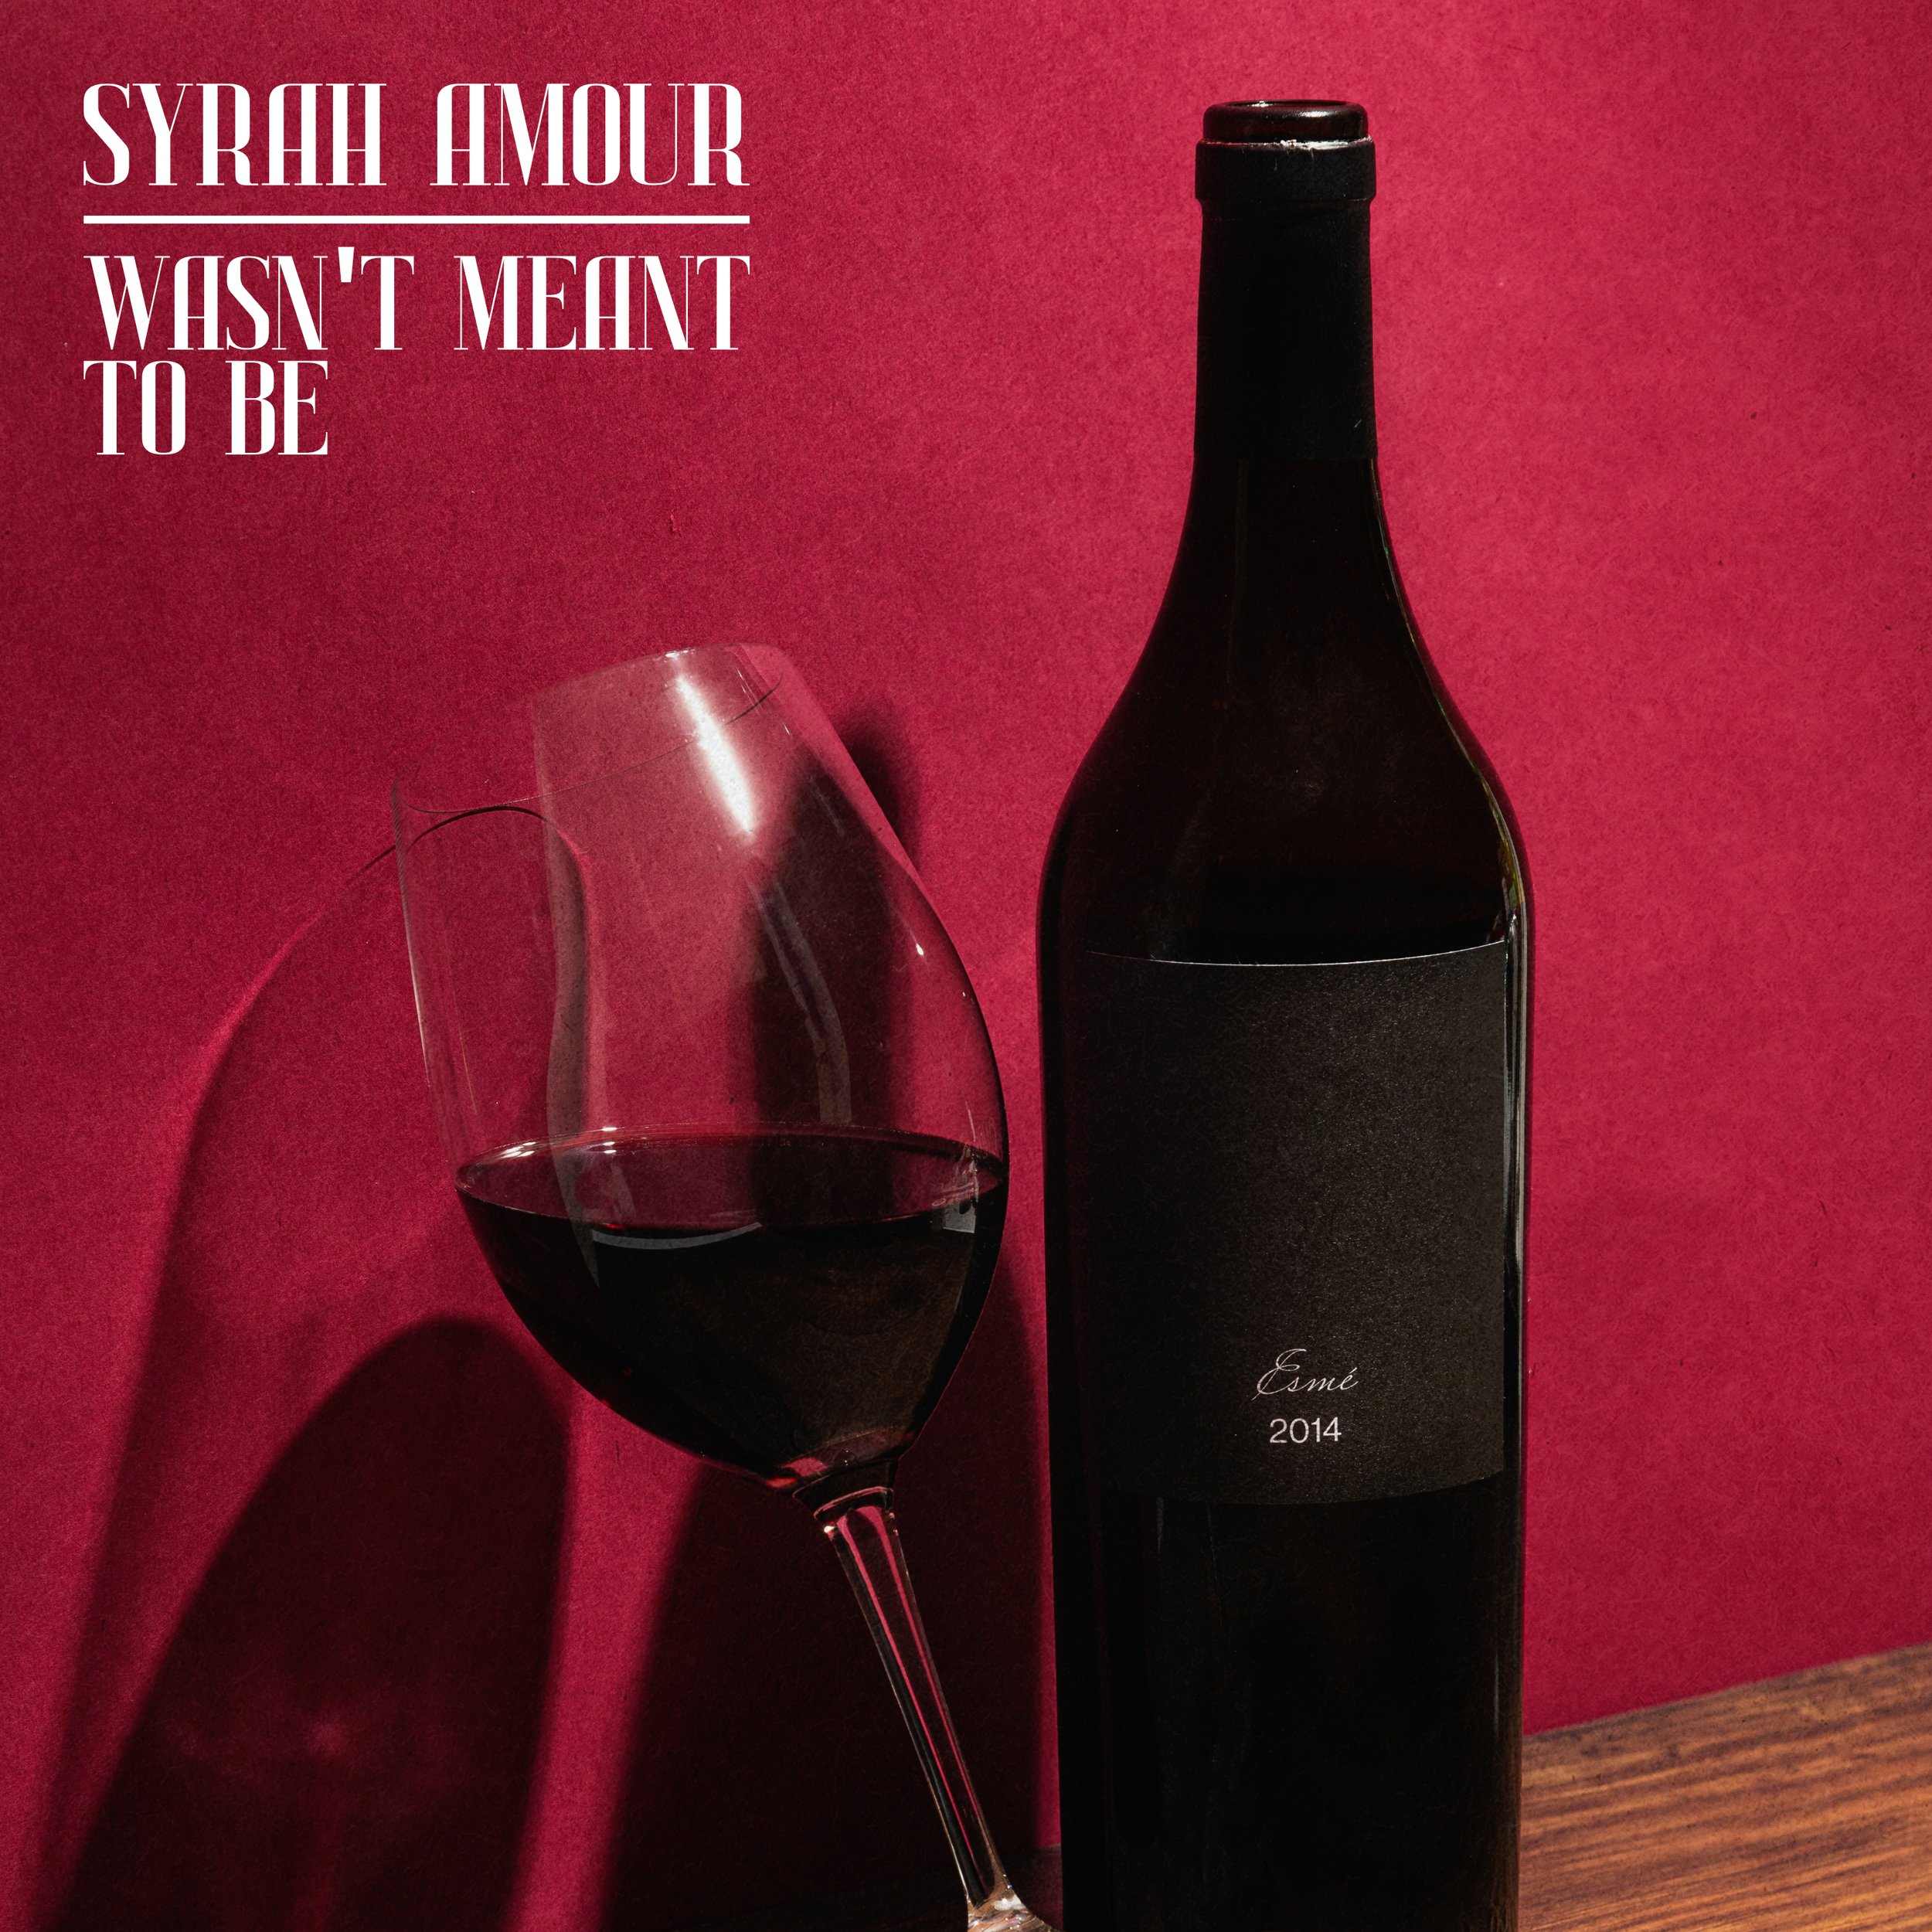 Syrah Amour - Wasn't Meant To Be - Artwork (1) (1).jpg